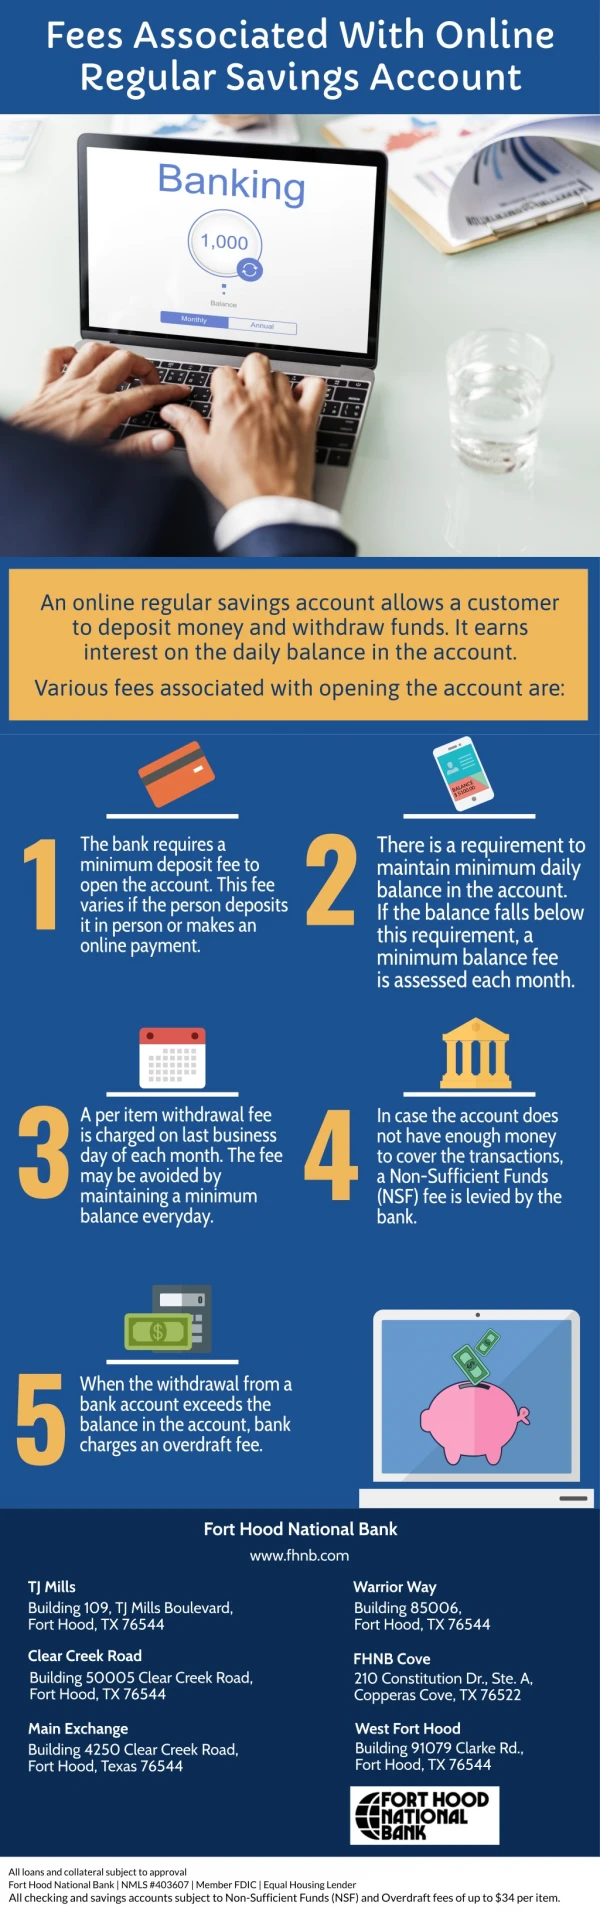 Fees Associated With Online Regular Savings Account